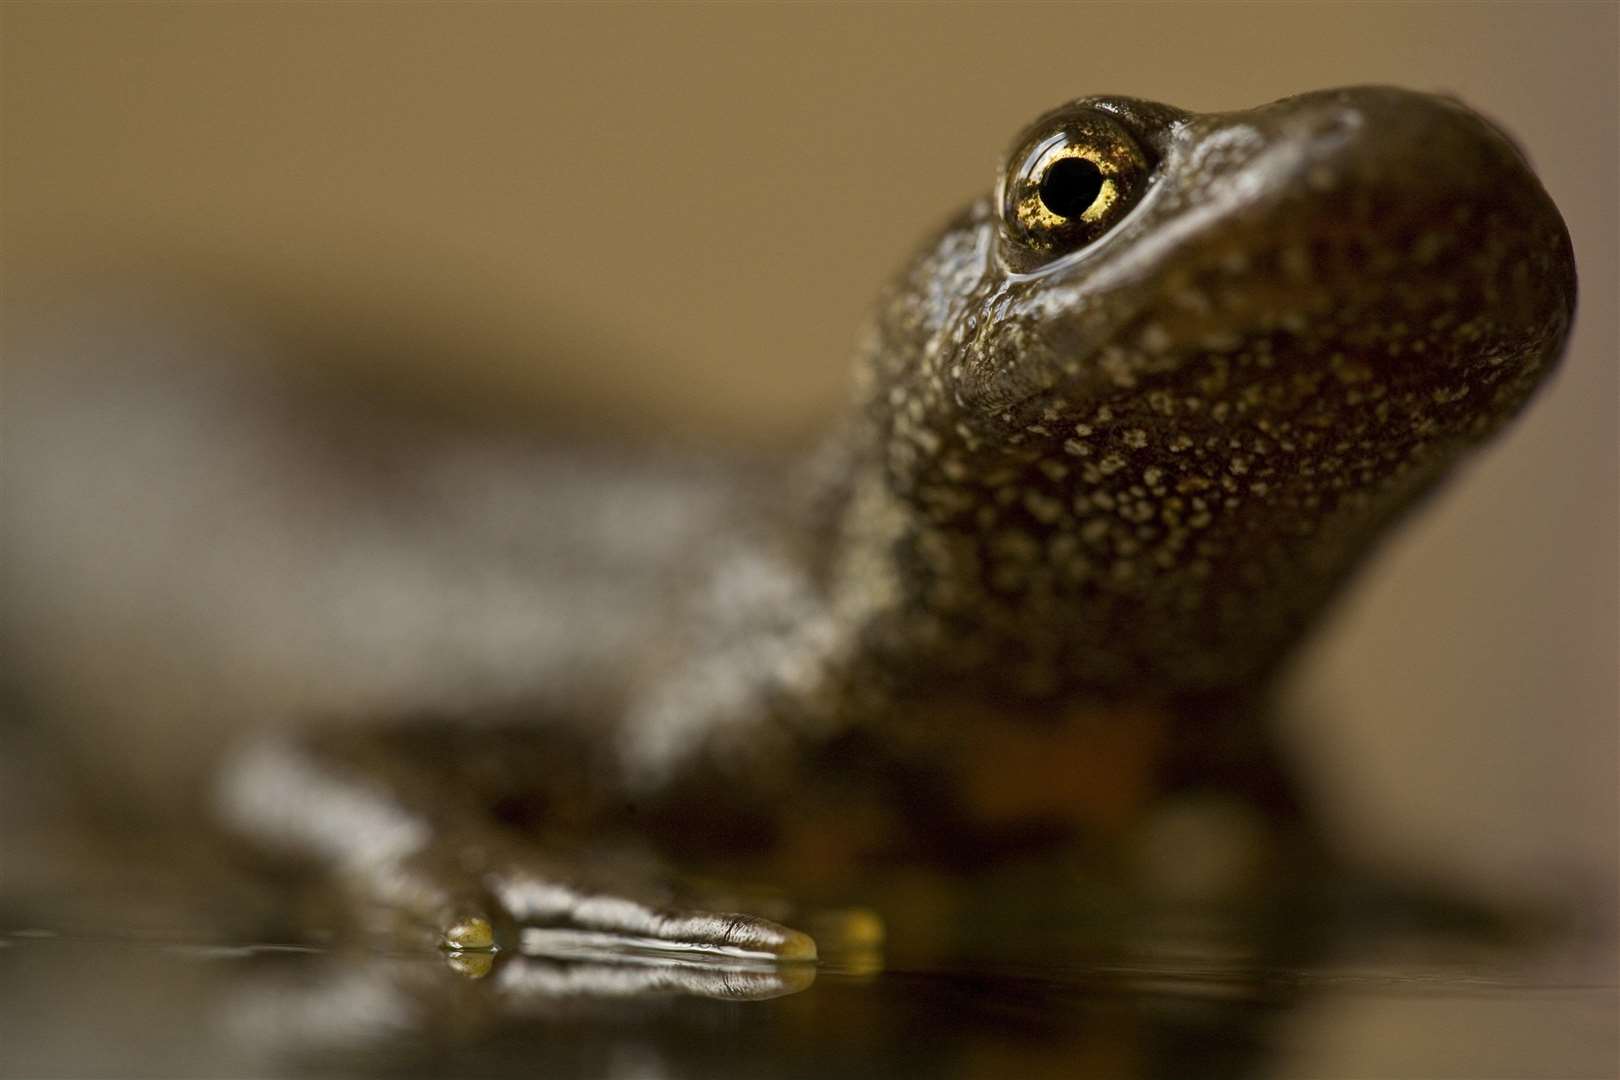 Great crested newt habitats are just one thing developers have to check for